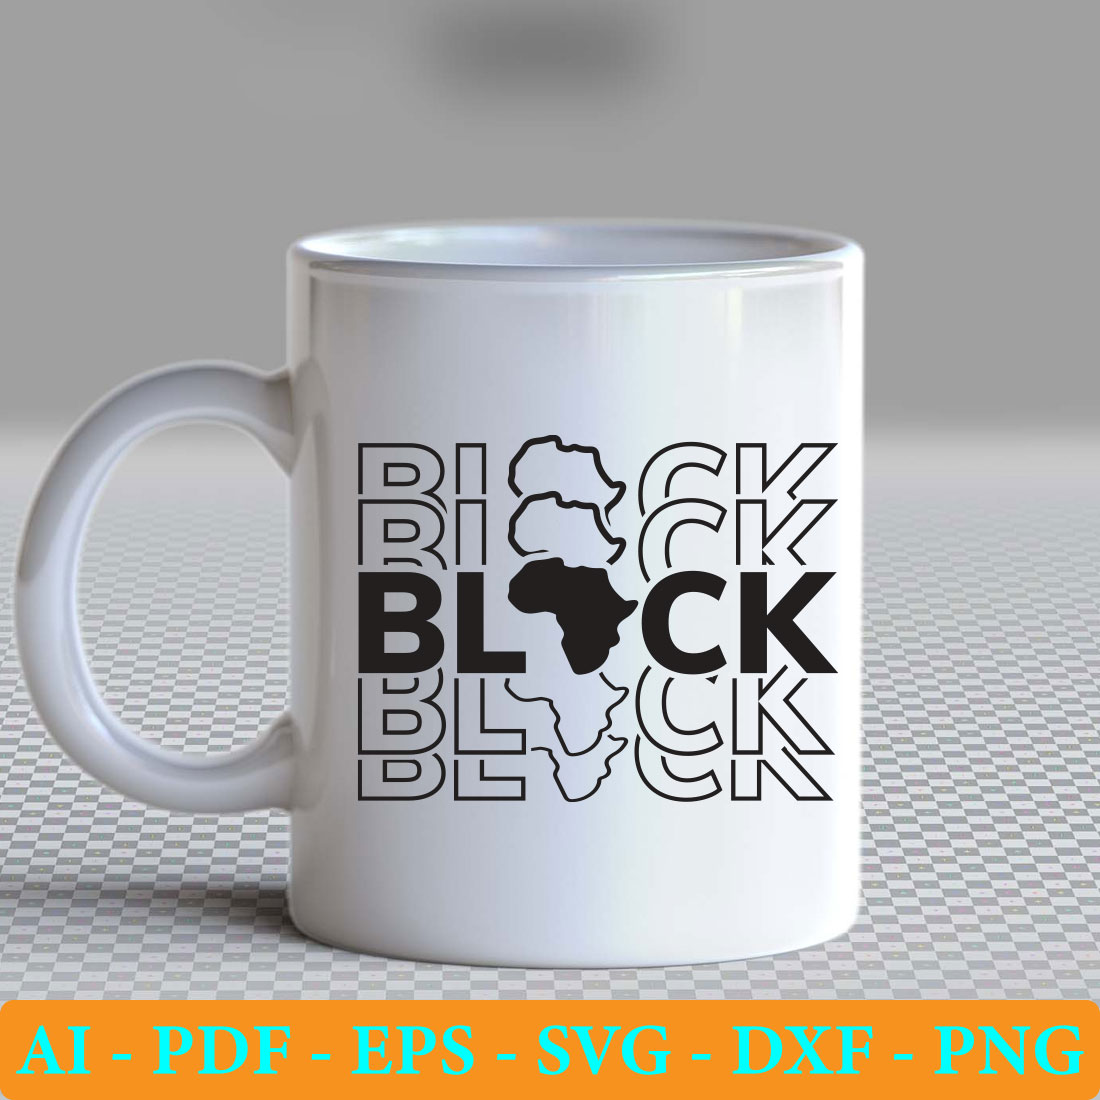 White coffee mug with black lettering on it.